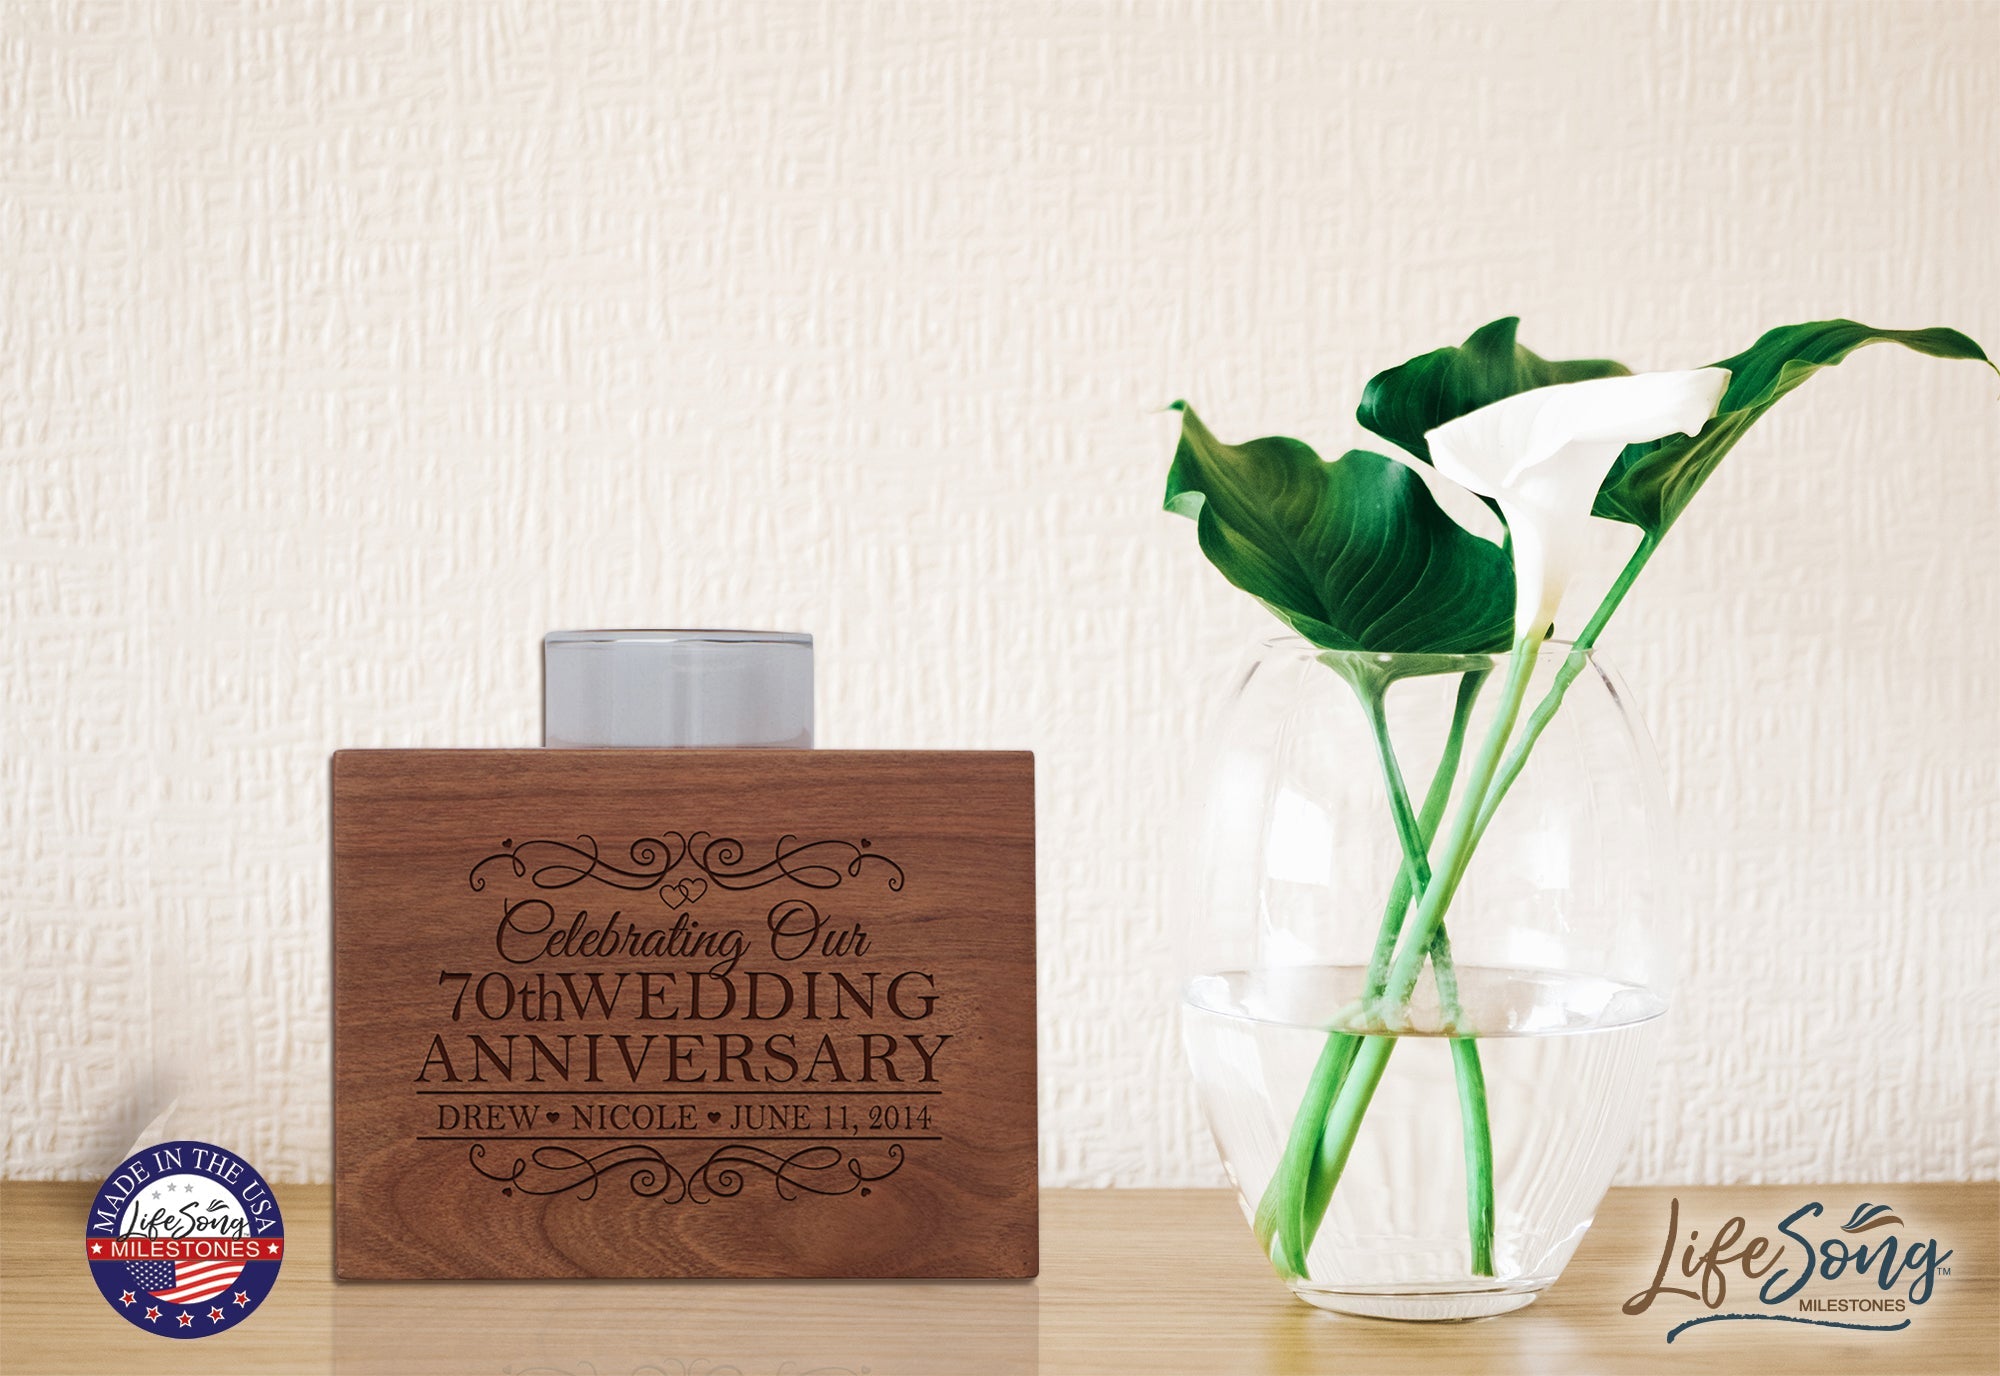 Personalized 70th Anniversary Candle Holder - Celebrating - LifeSong Milestones